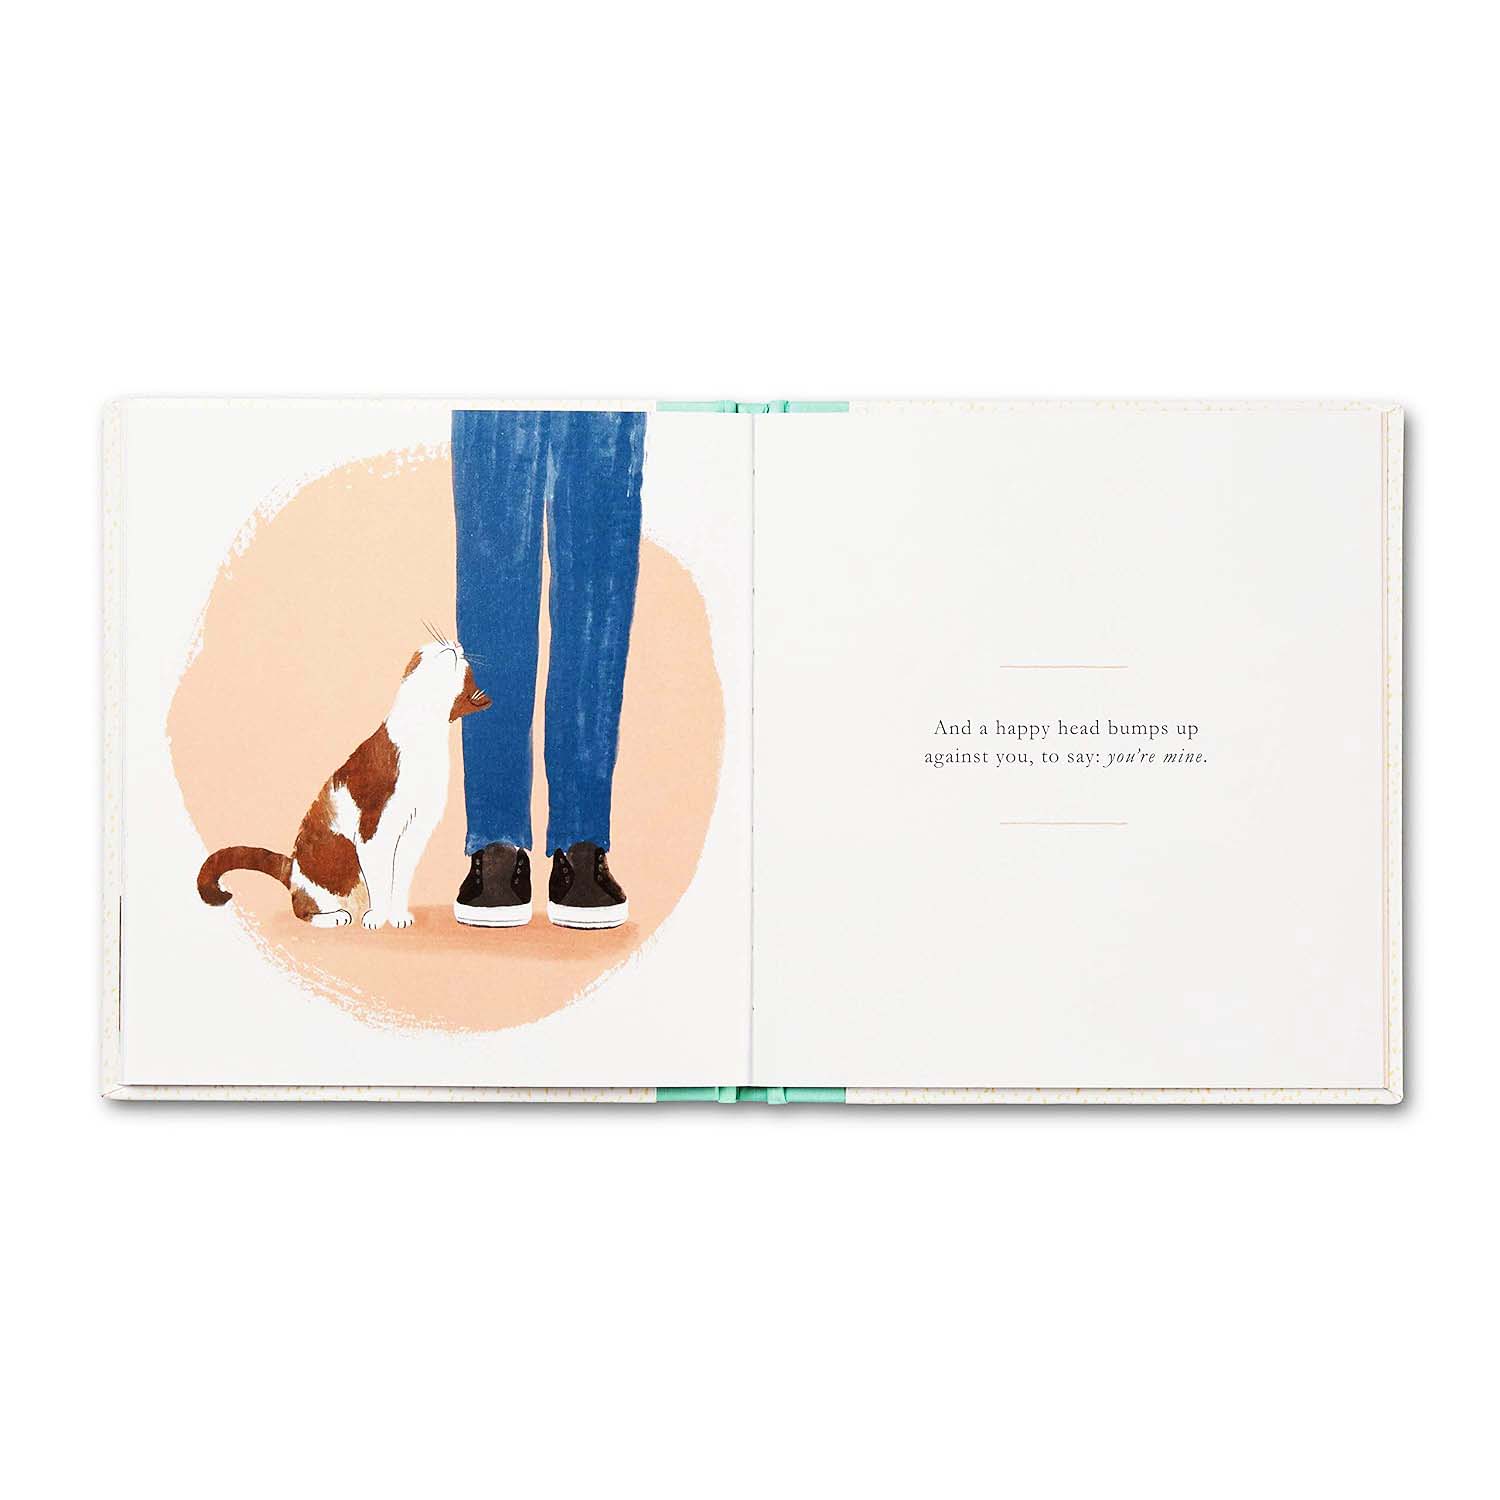 middle pages of the book "When You Love a Cat" showing the illustration of a cat  and a person 